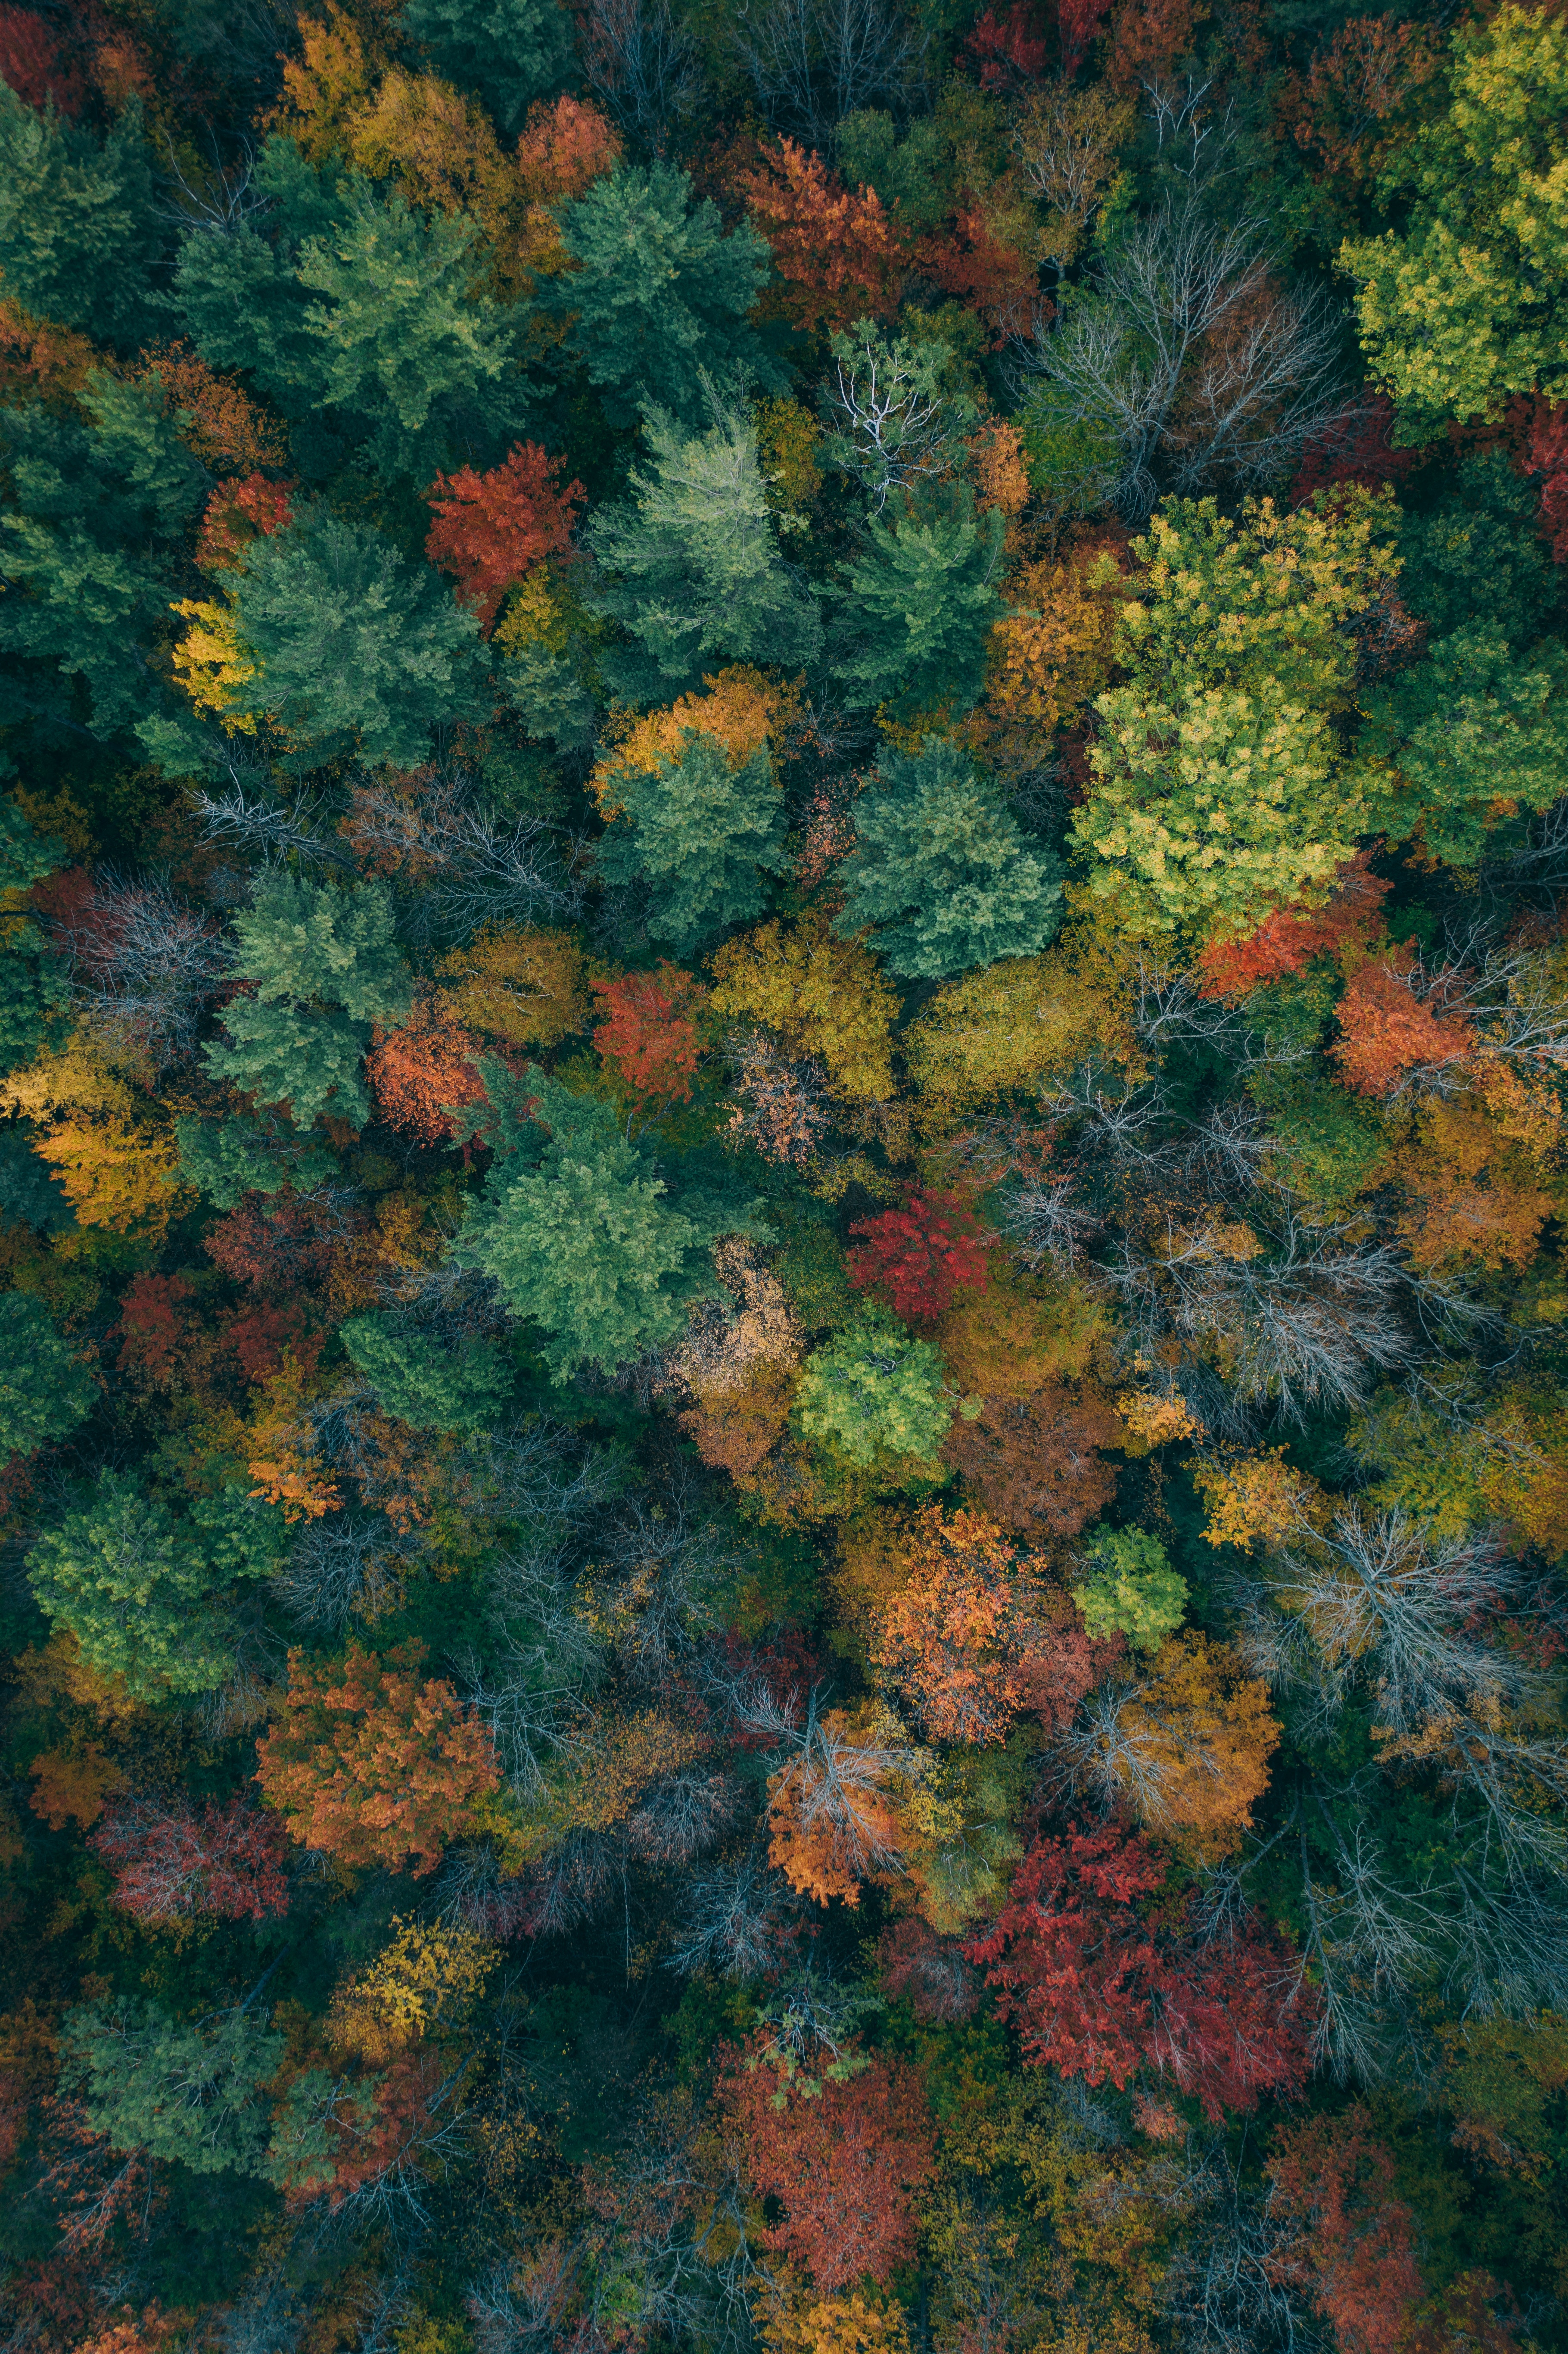 forest, colorful, autumn paints, nature, autumn colors, autumn, trees, view from above, colourful